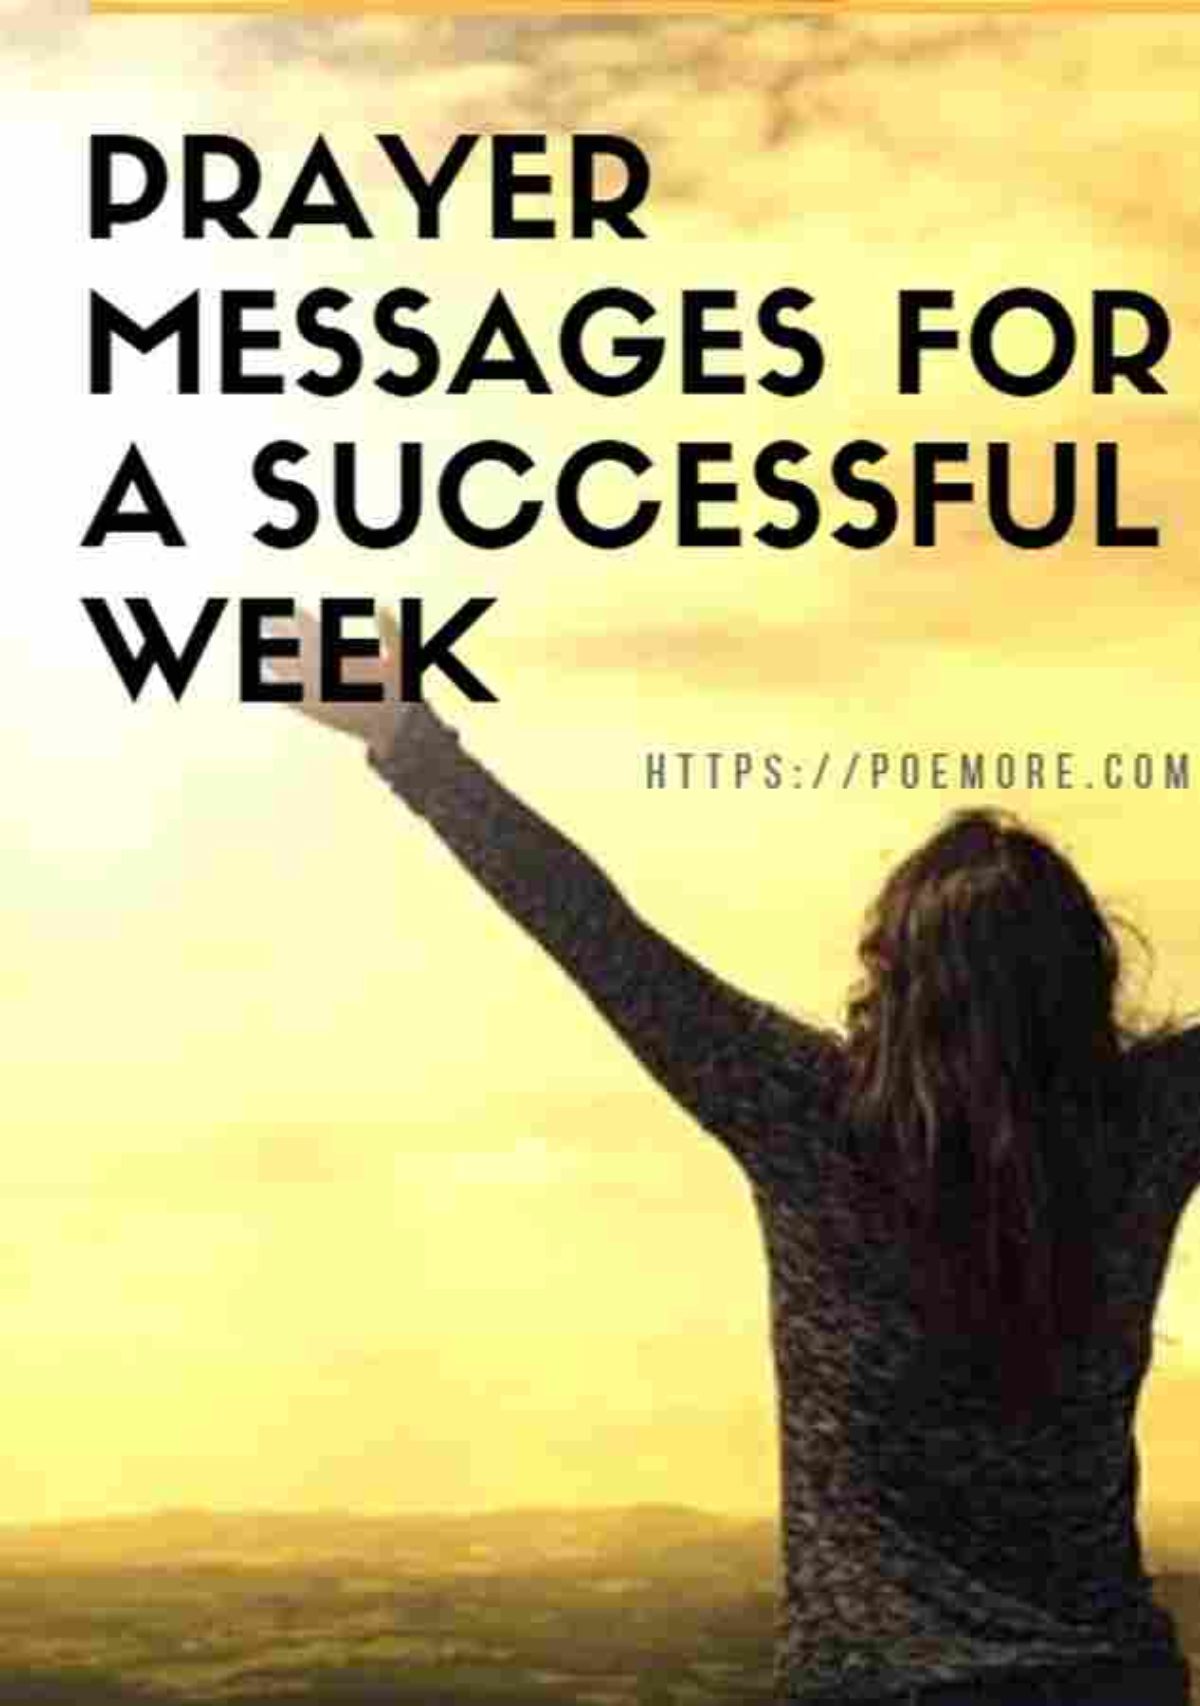 Prayers, Messages And Motivational Quotes For A Great Week